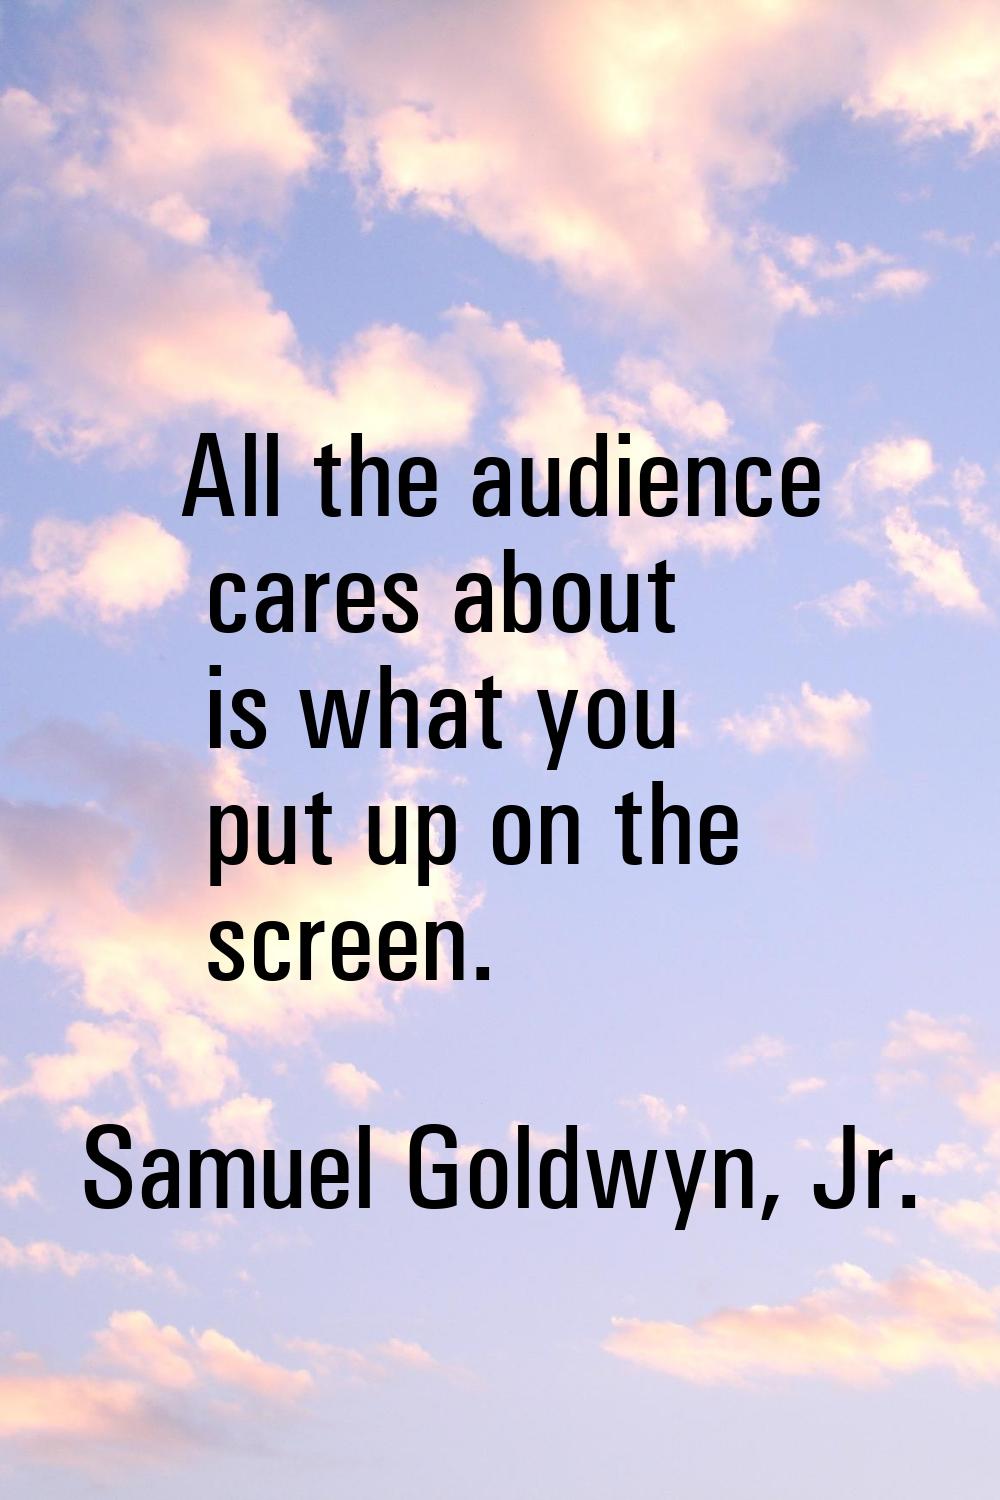 All the audience cares about is what you put up on the screen.